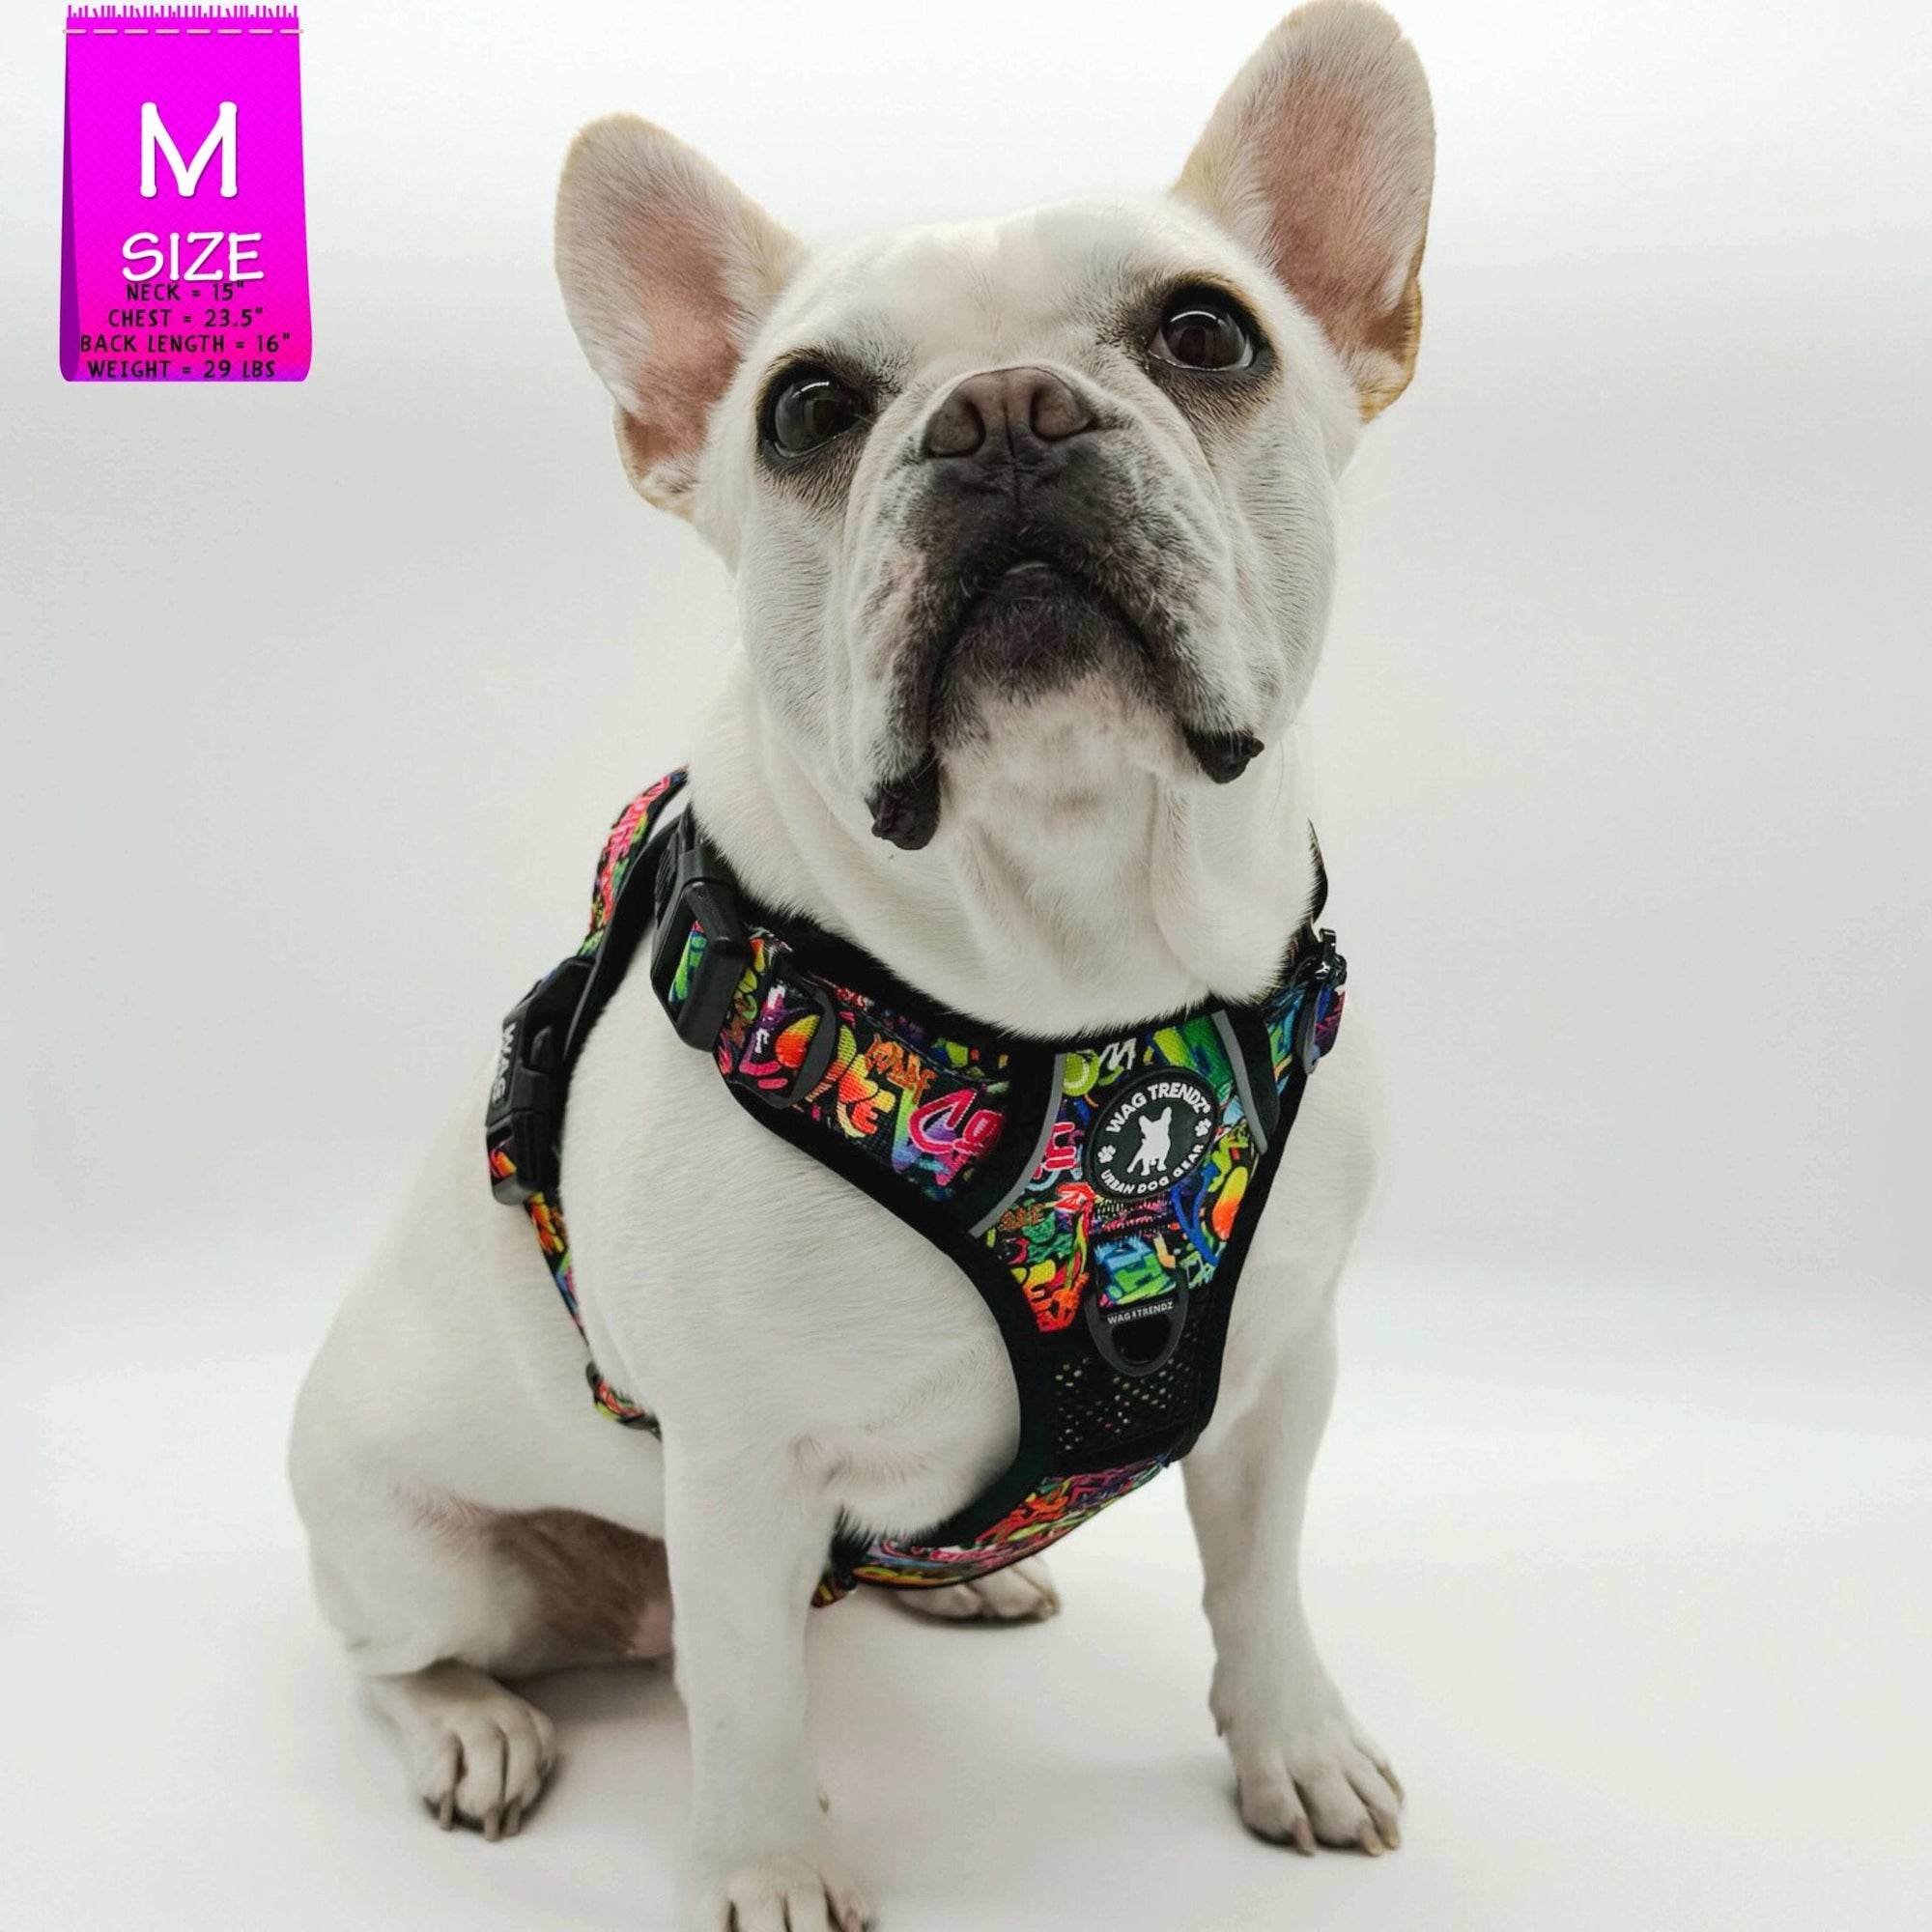 Dog Harness and Leash Set - French Bulldog wearing a medium no pull dog harness with handle - multi colored Street Graffiti - against solid white background - Wag Trendz